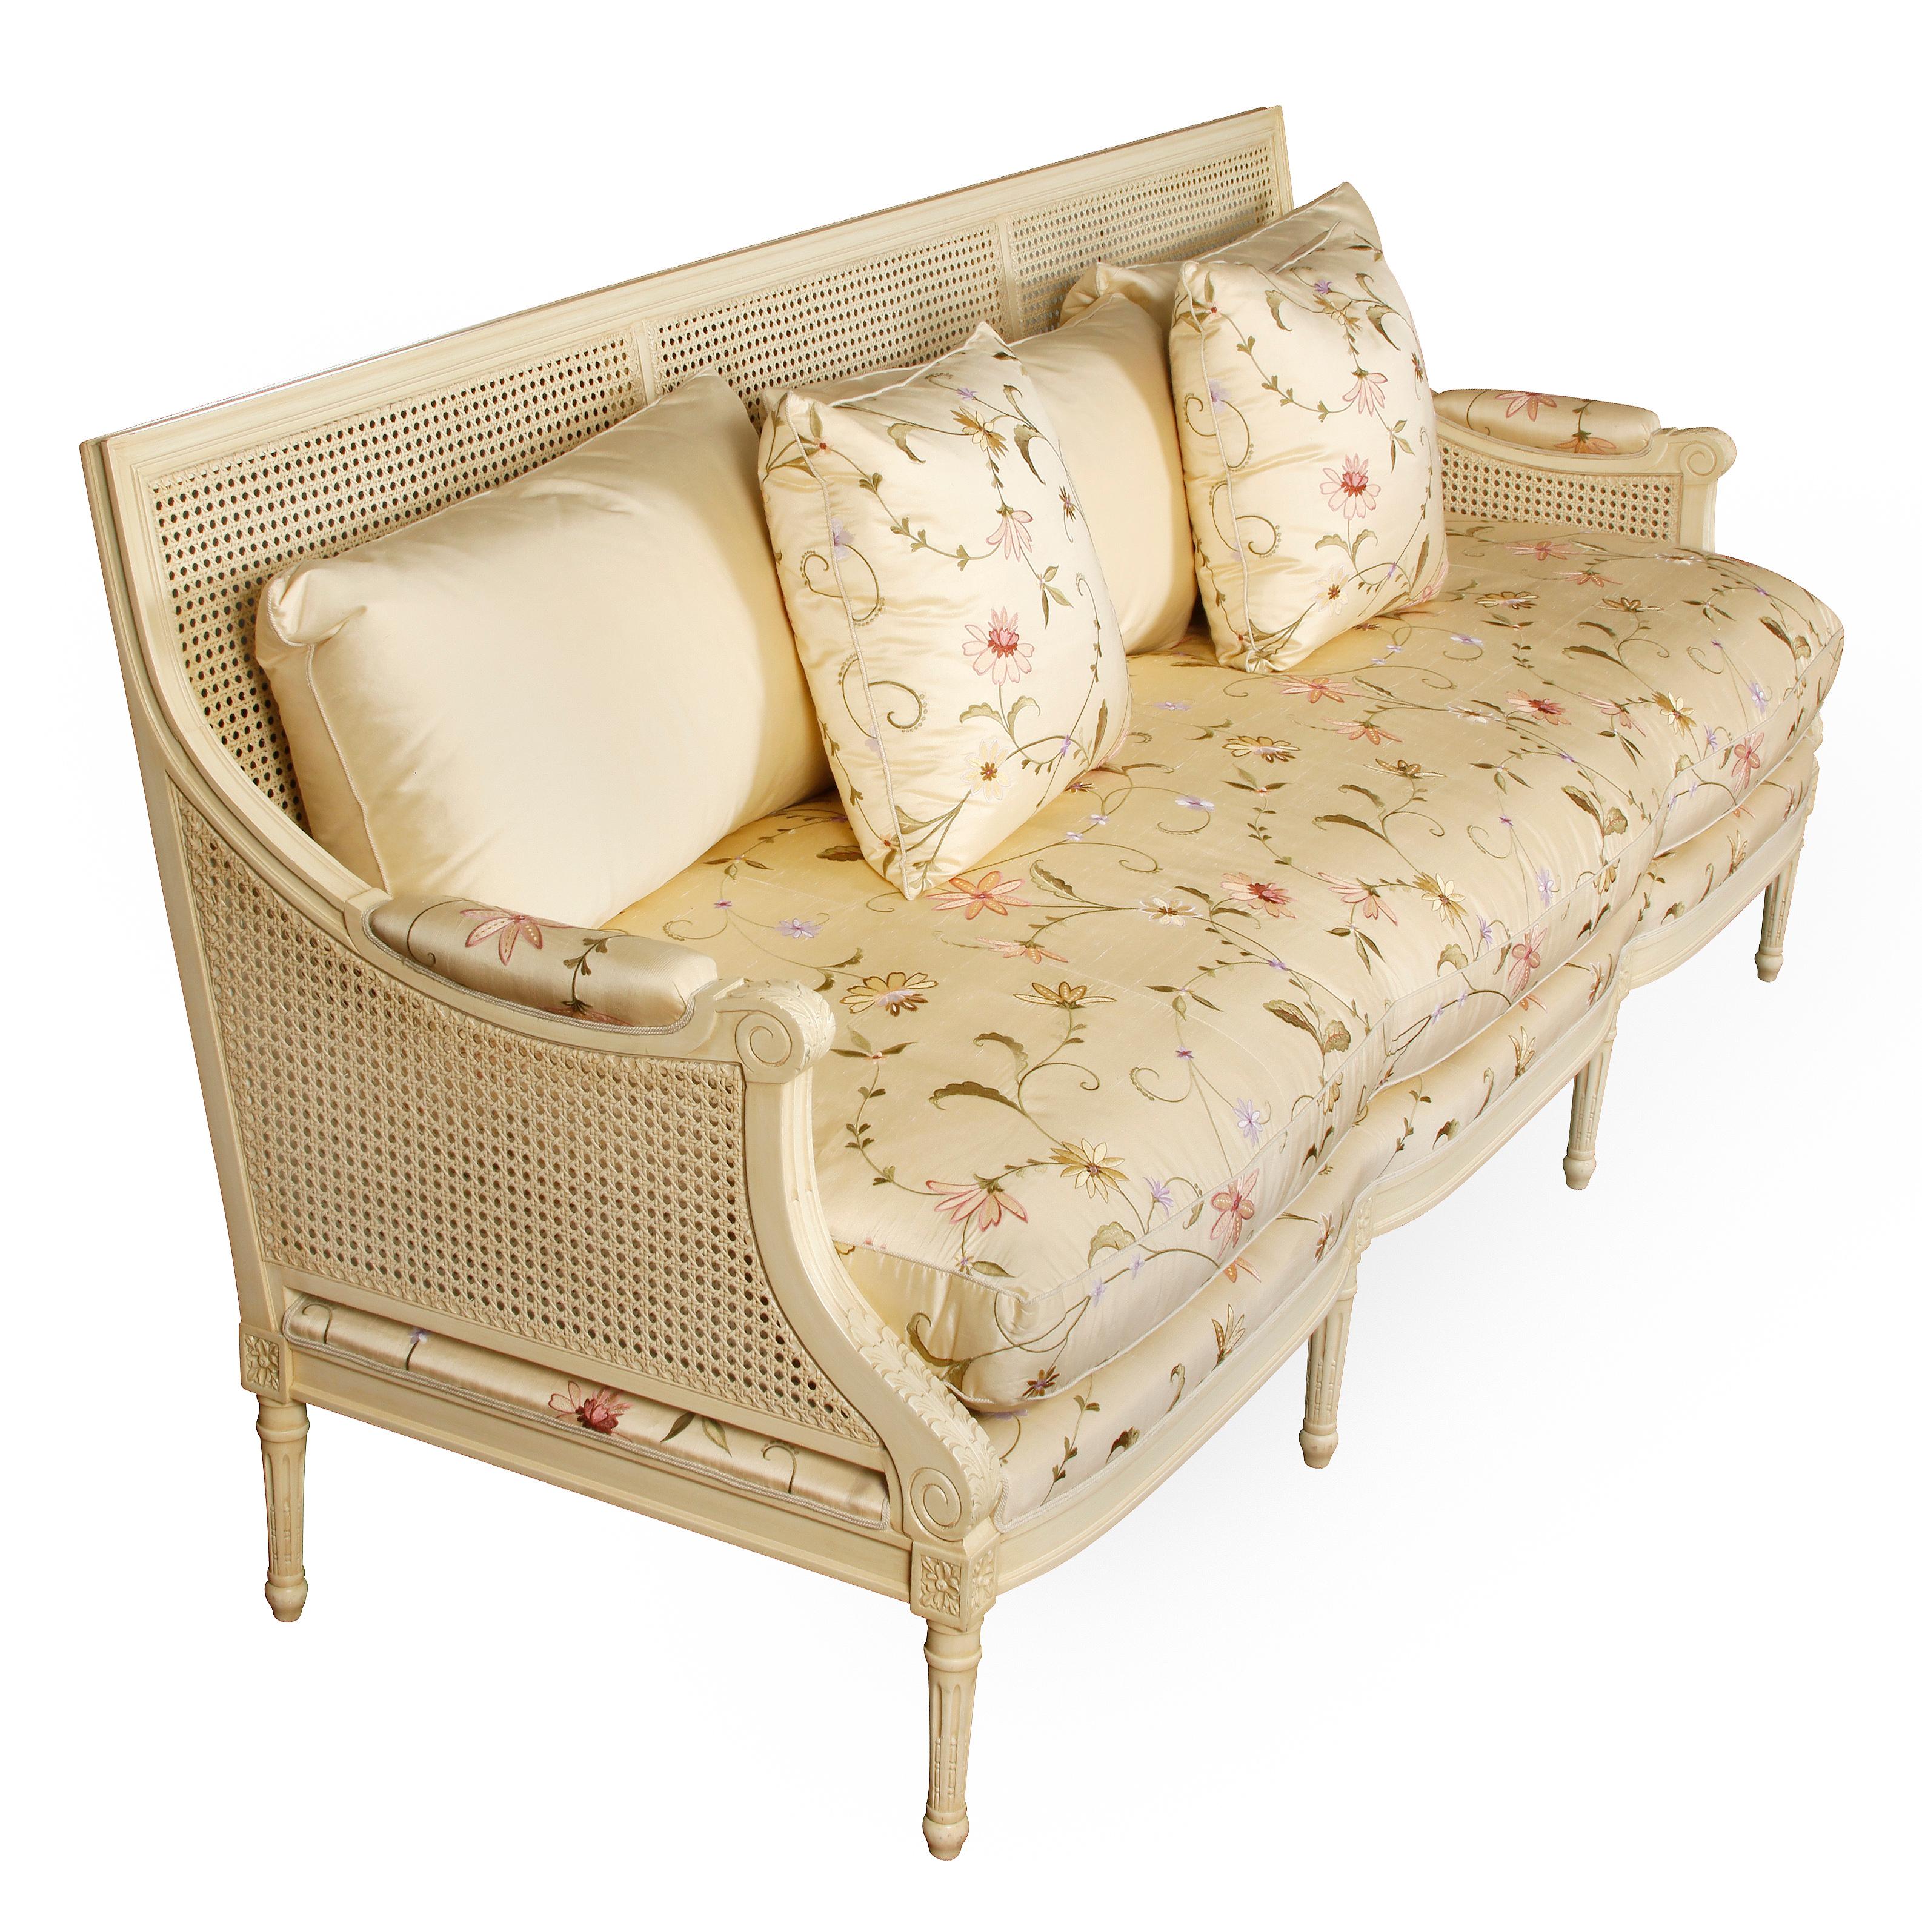 Beautiful painted ivory settee with cane back and sides, silk floral fabric seat cushion and pillows and ivory silk back cushions. Carved in Louis XVI style with Vitruvian scroll and floral details on arms and straight legs